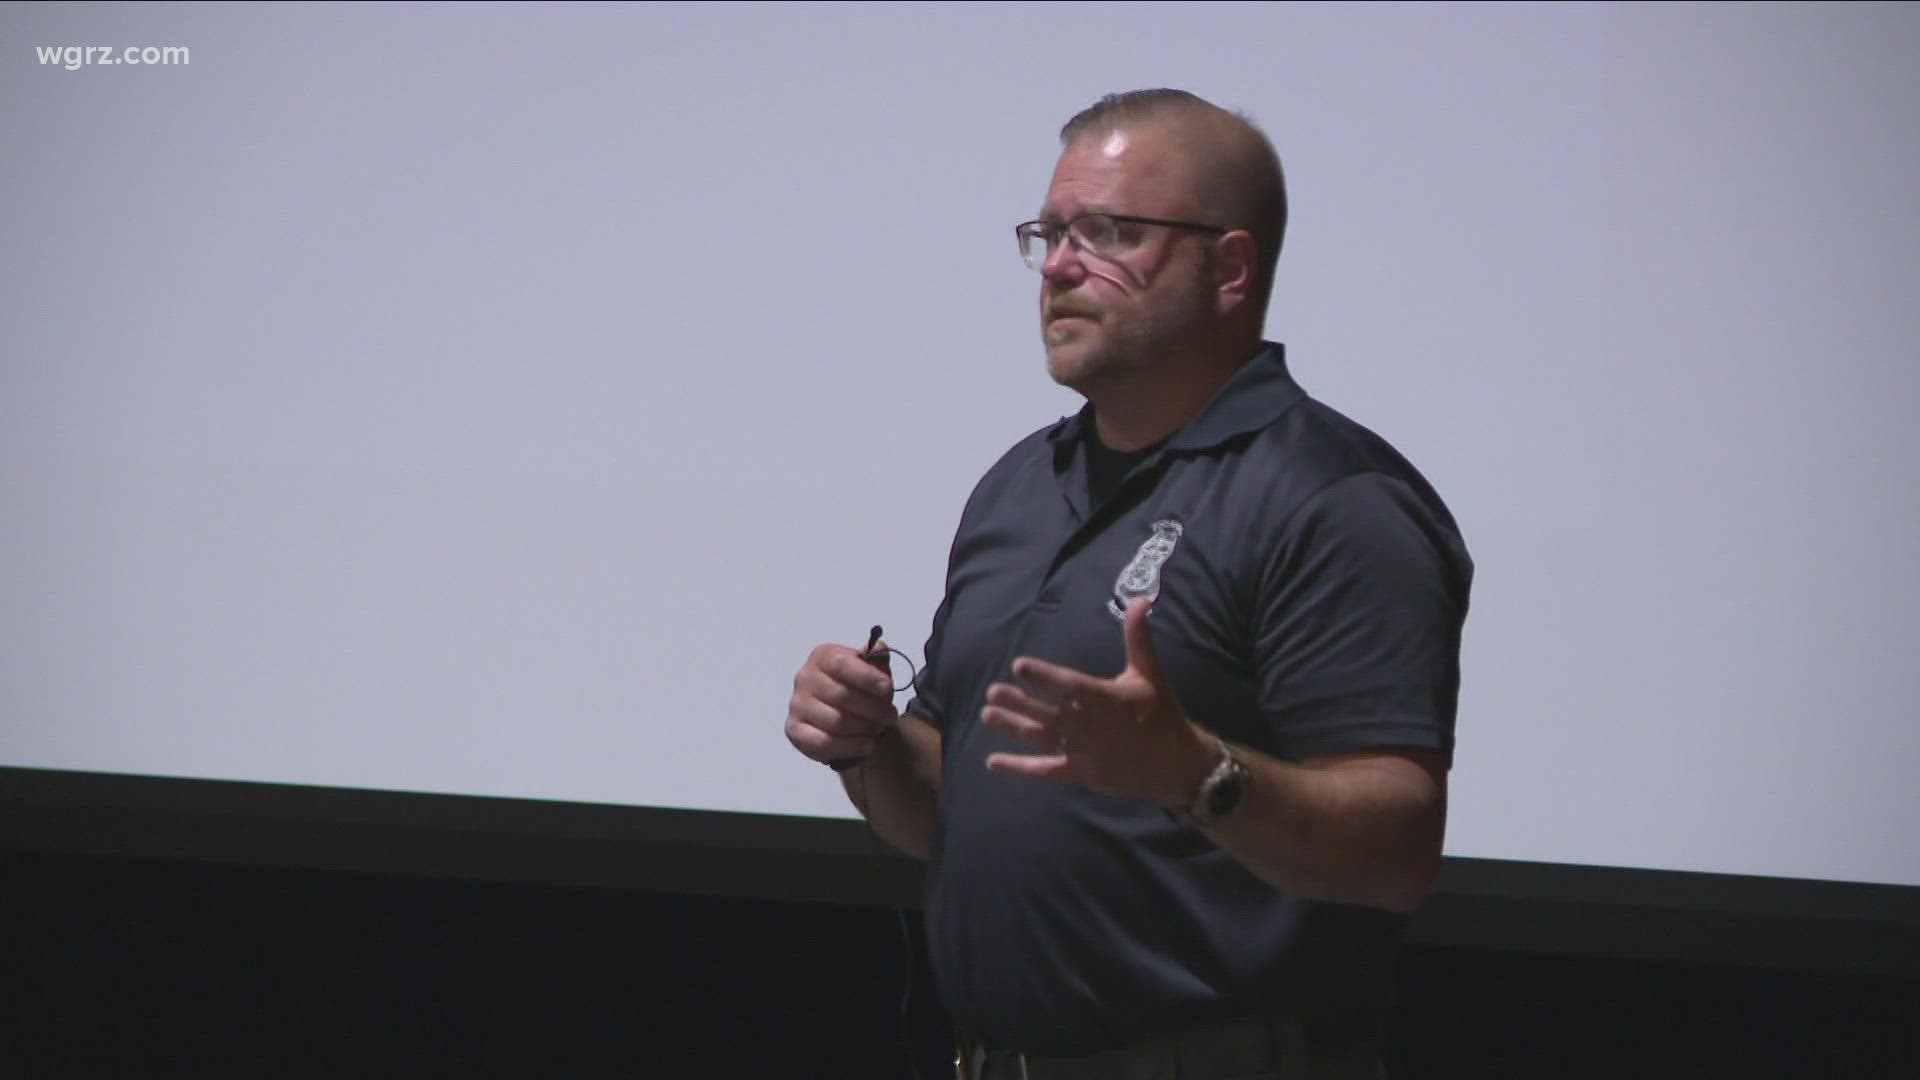 In the aftermath of the Tops shooting, the town of Tonawanda held a training session to educate the community on how to keep themselves safe.